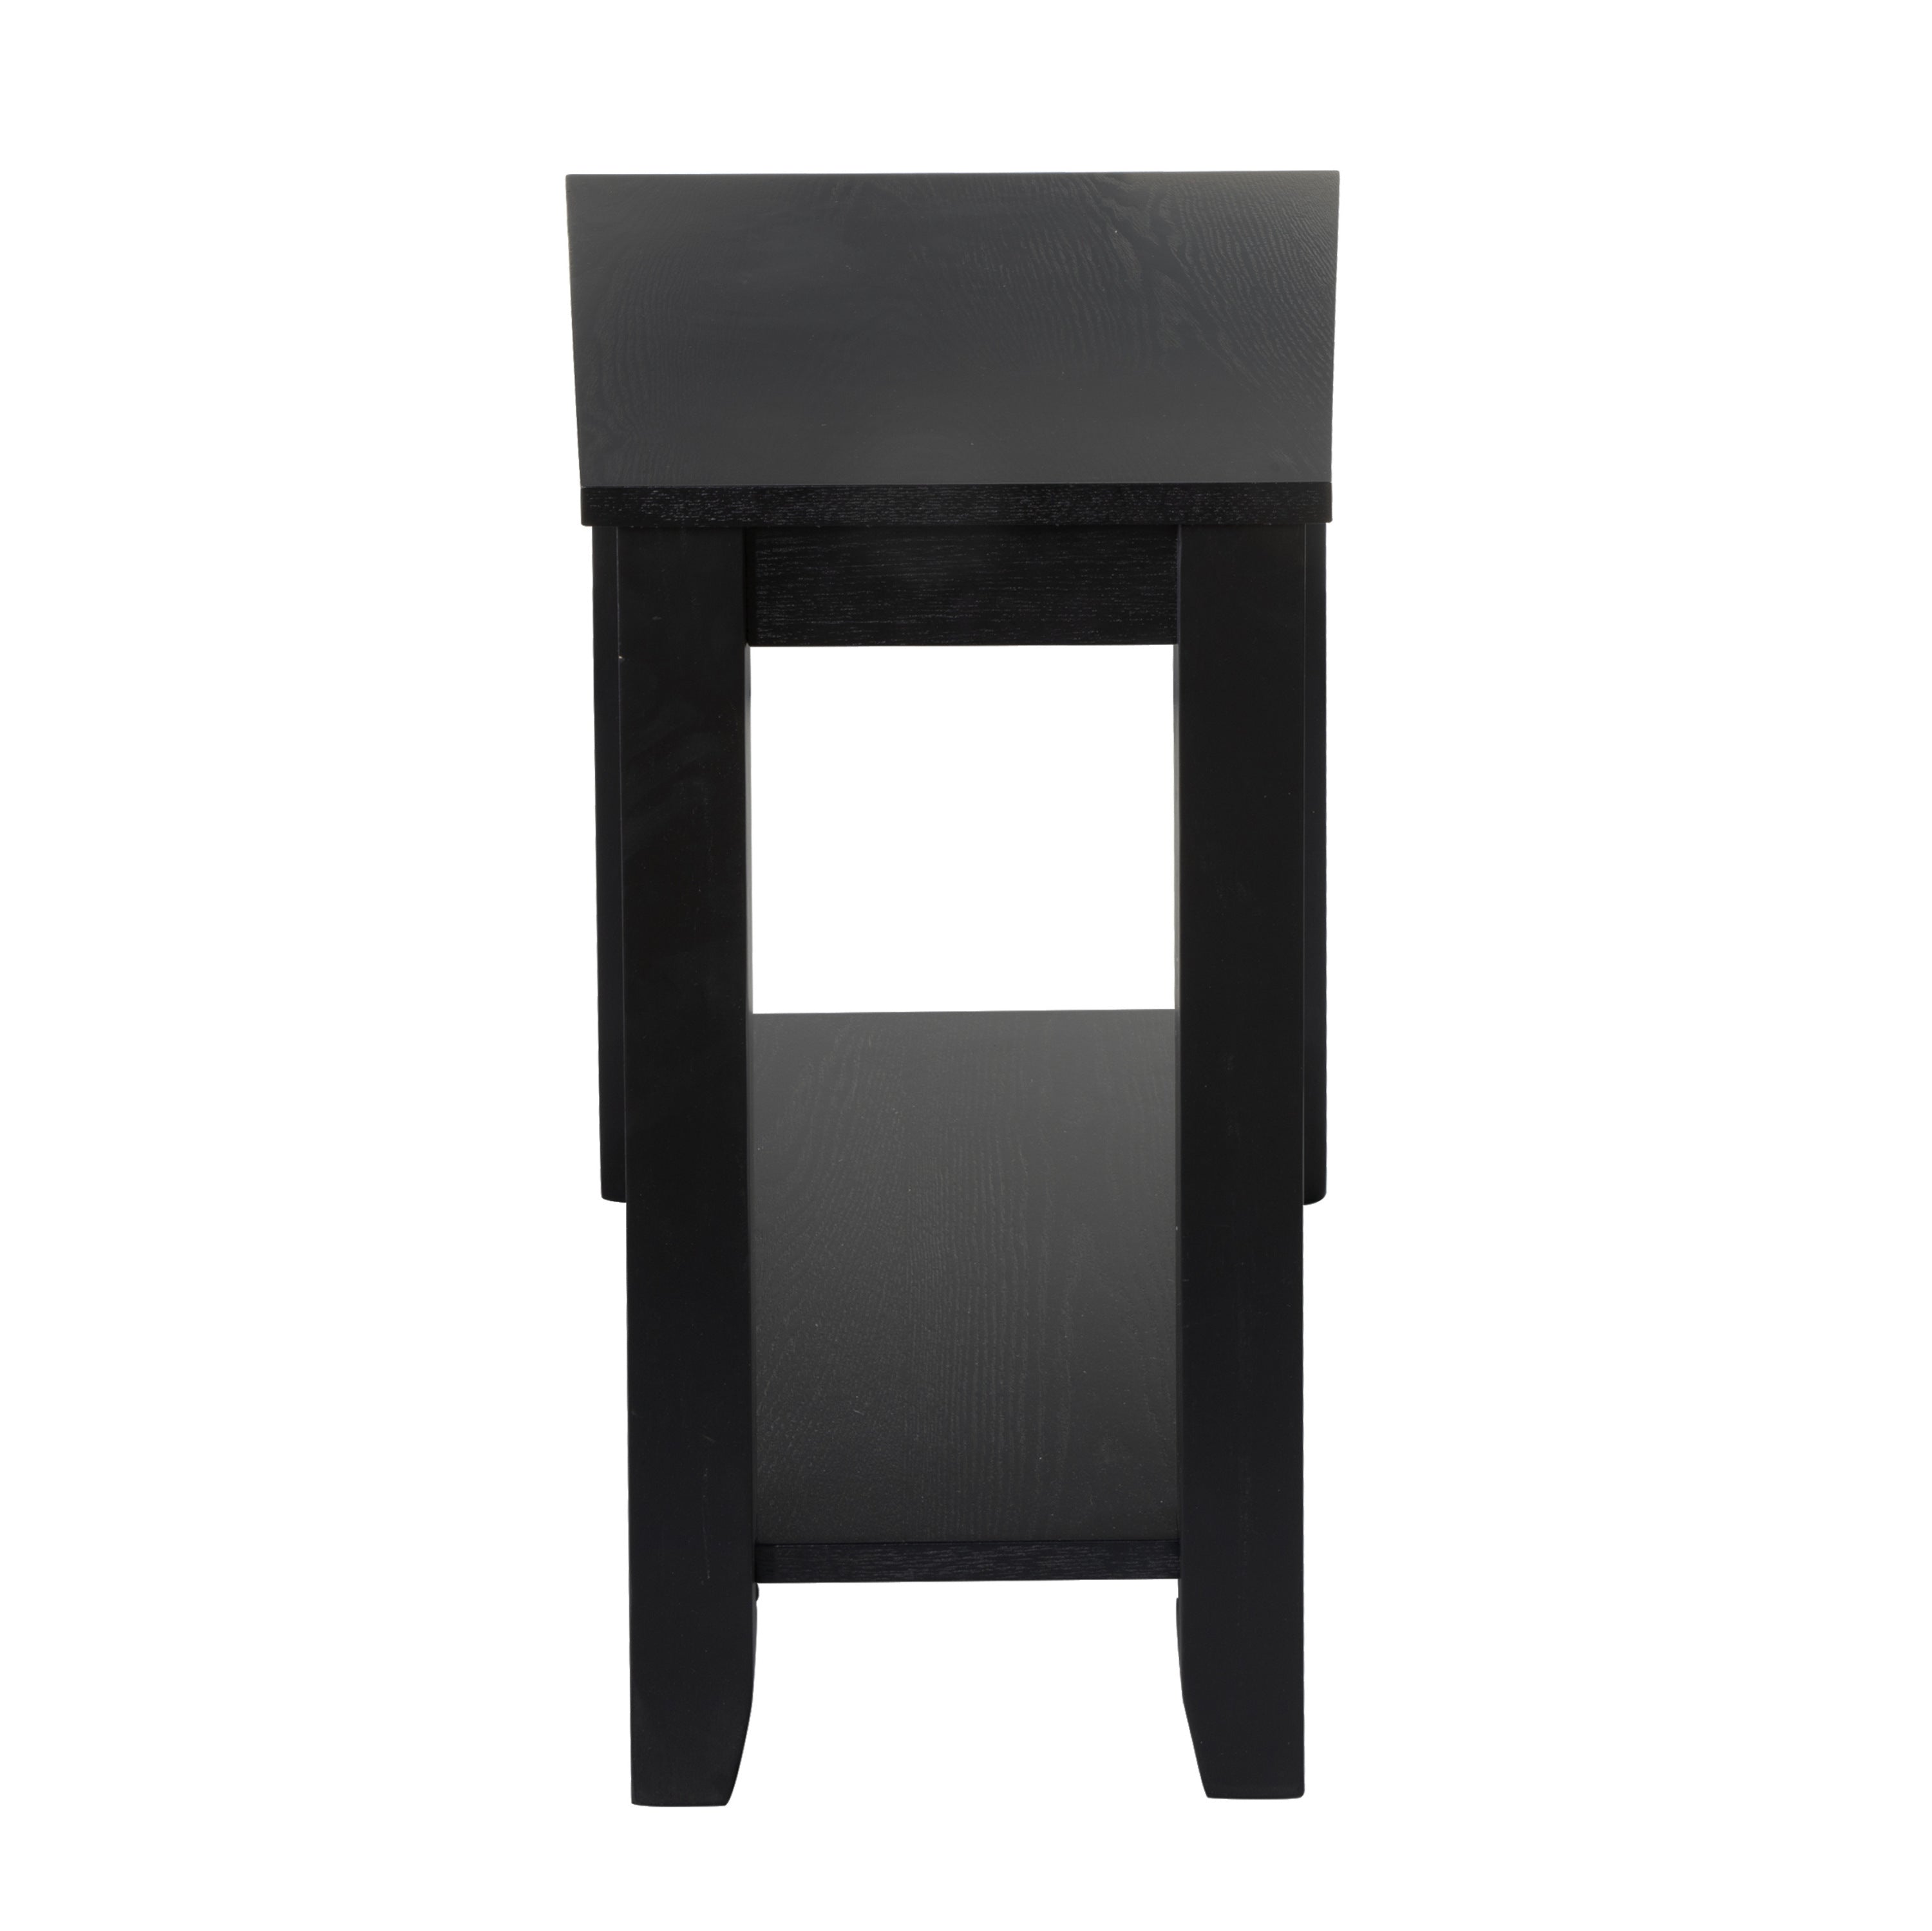 Chairside Table with Lower Shelf Wedge Shape Wooden Furniture